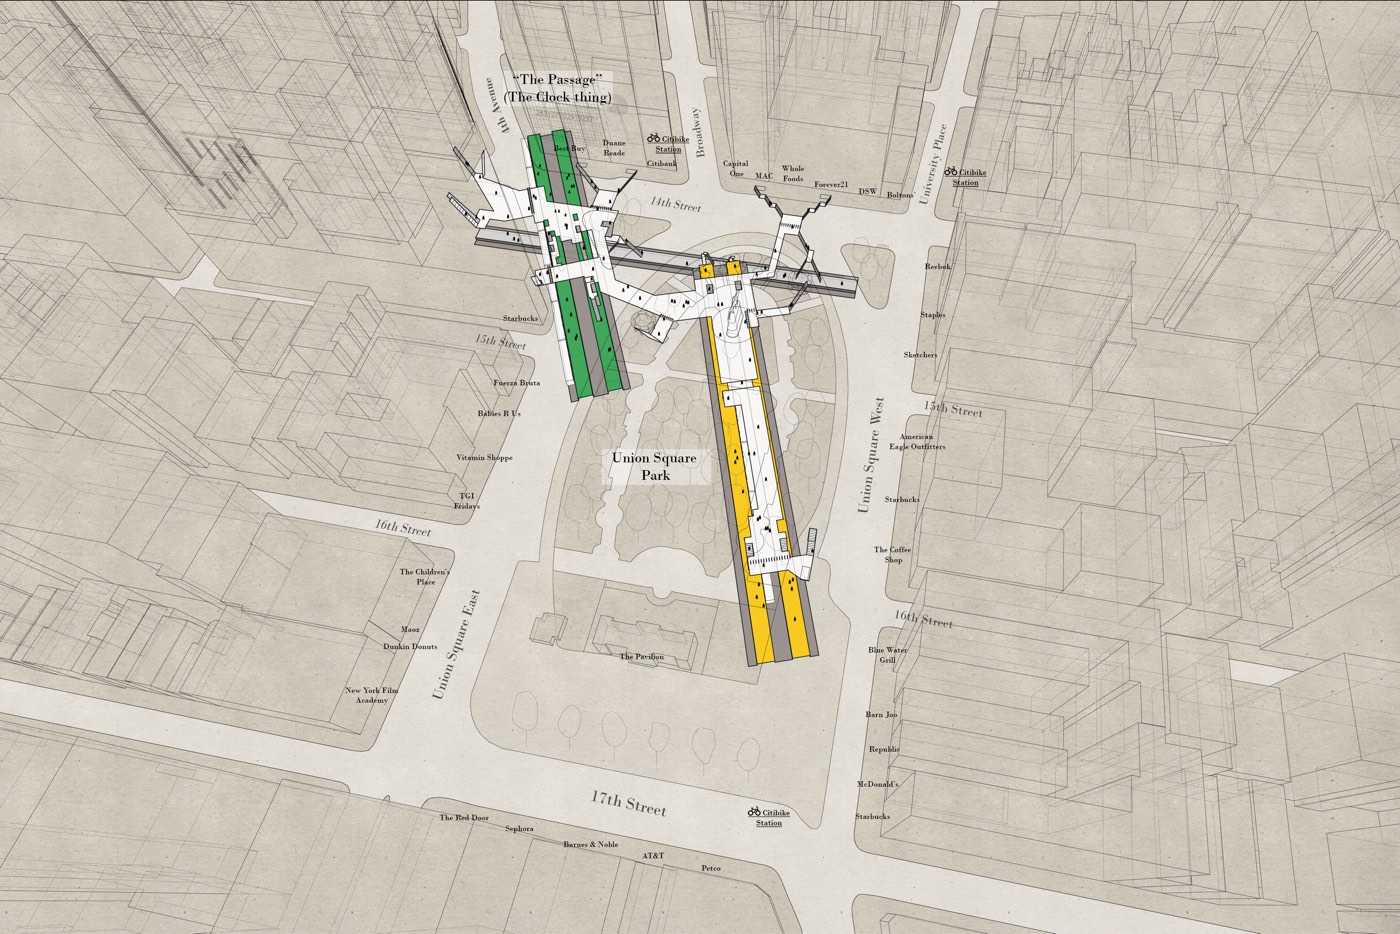 X-ray maps of NYC subway stations